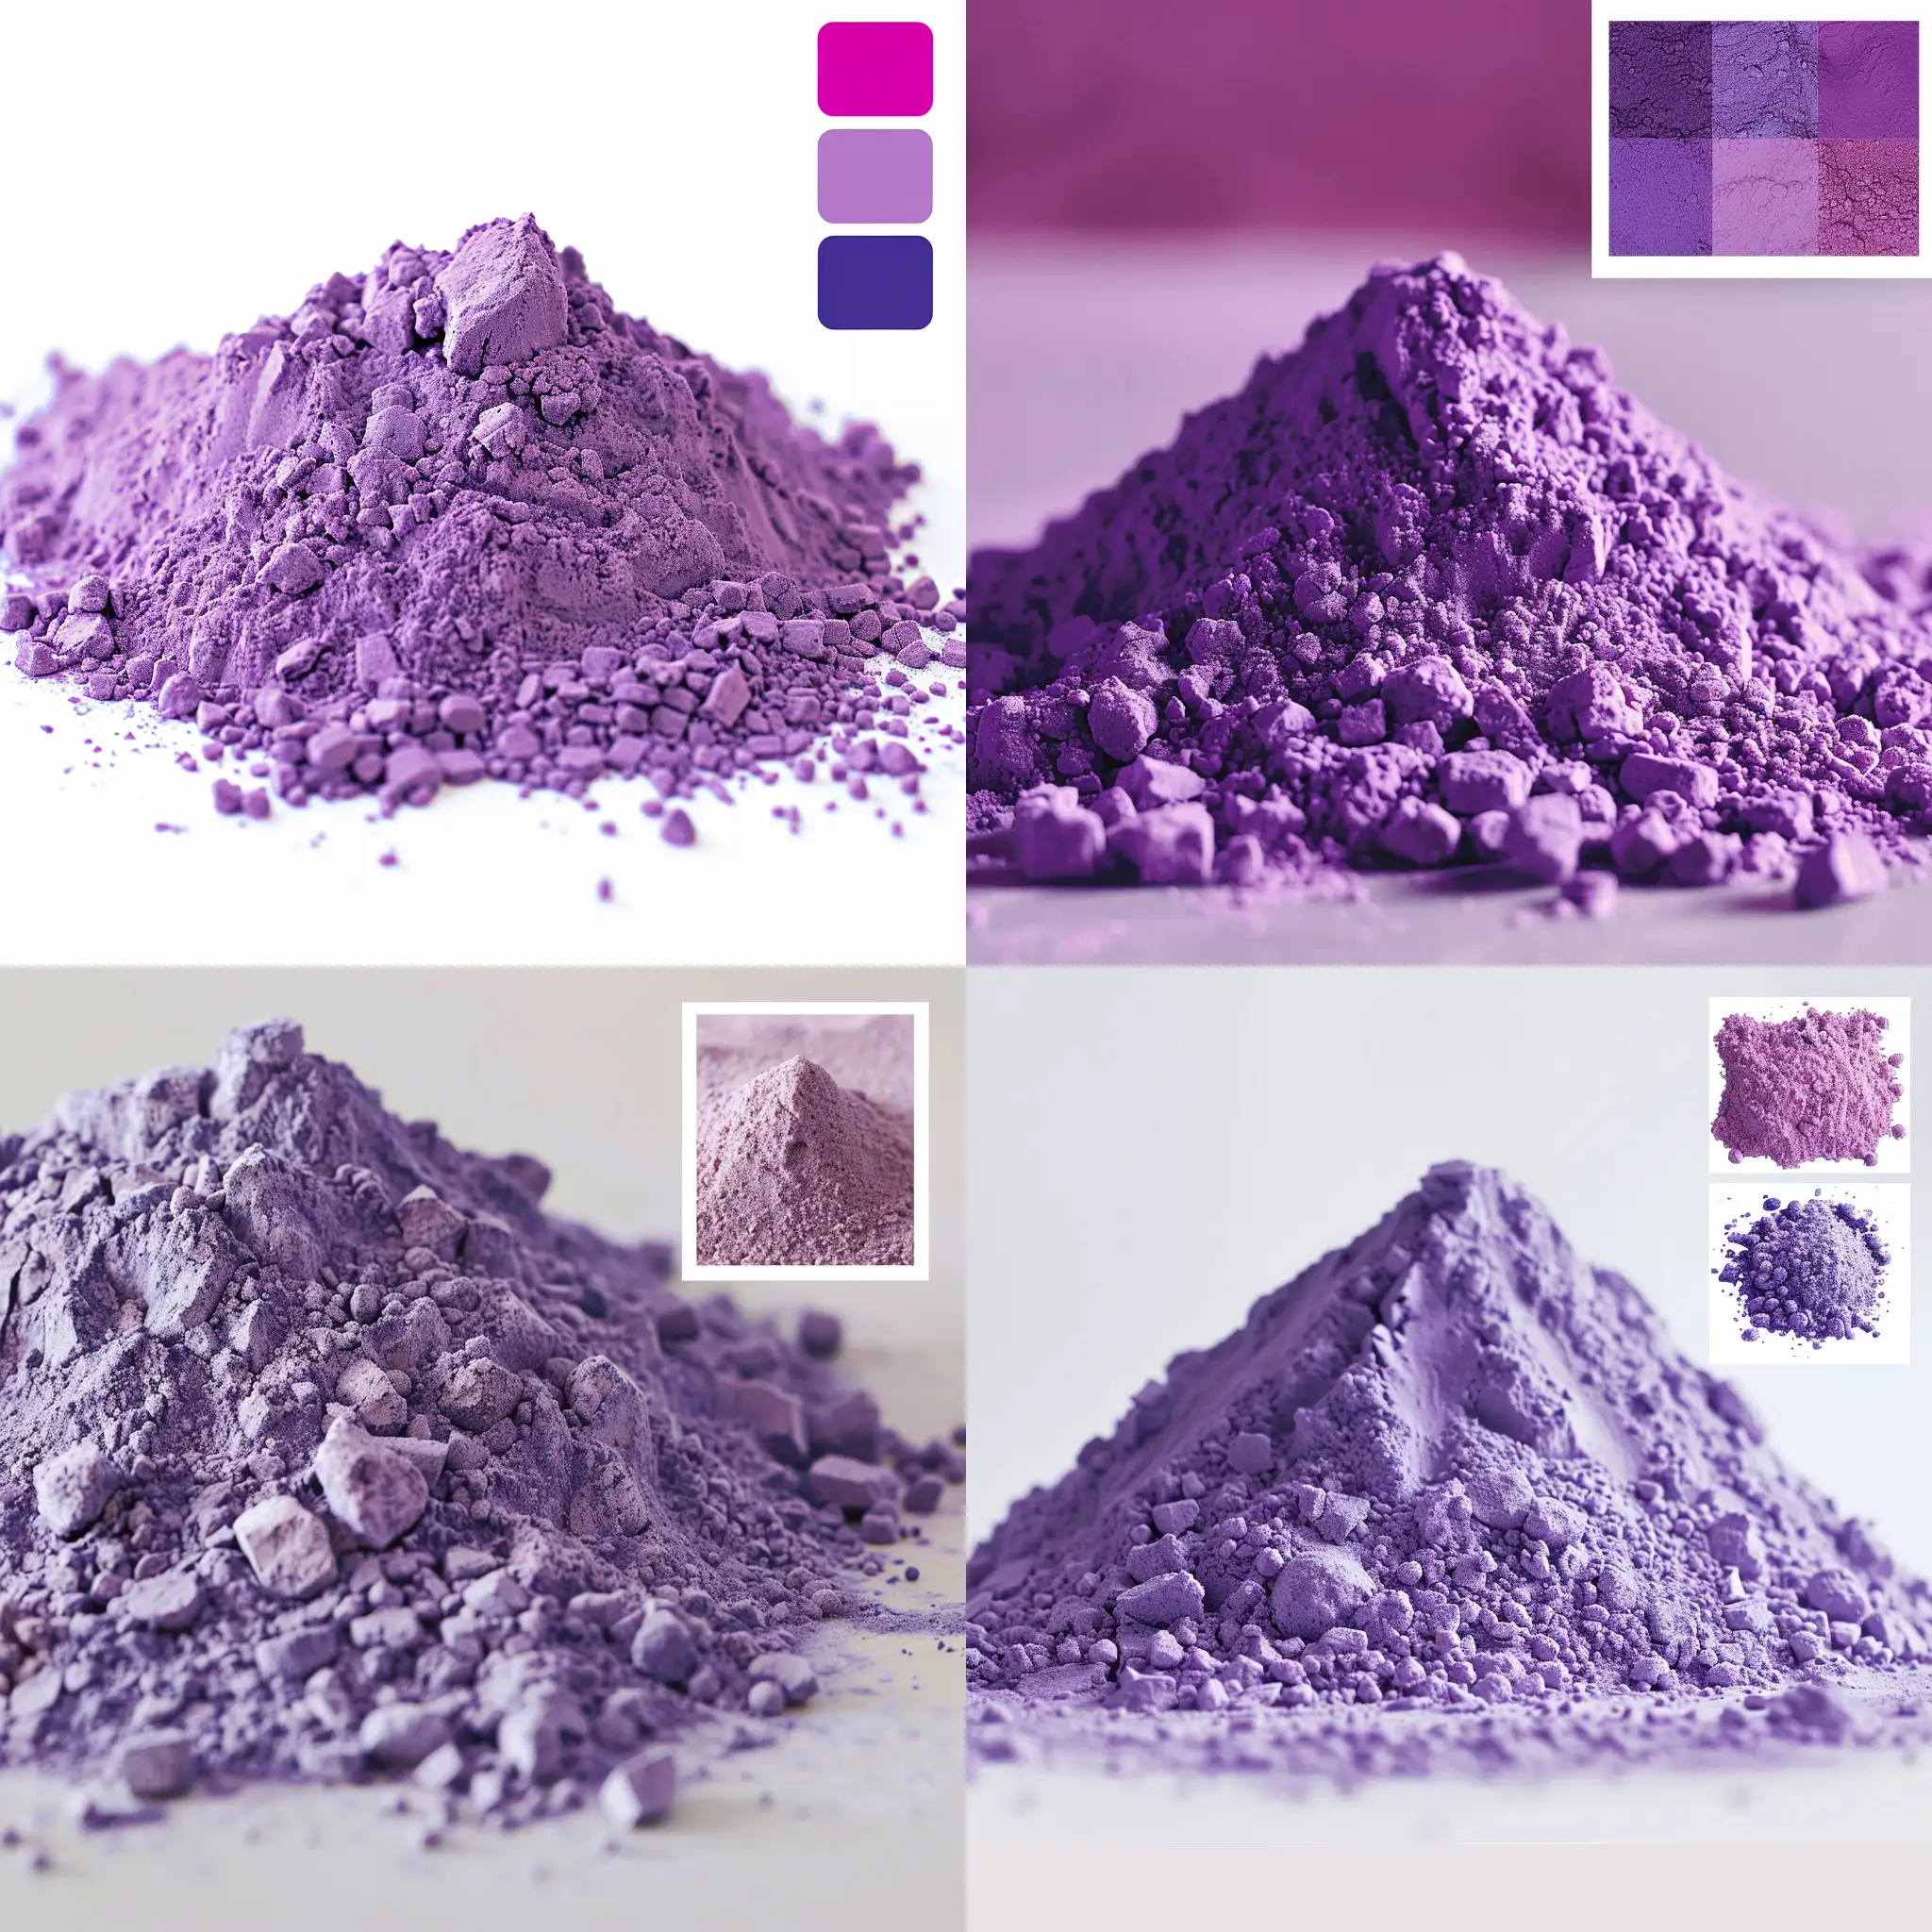 generate an image of pile of a purple flour powder (it should have the color #200052 and colors next to it)